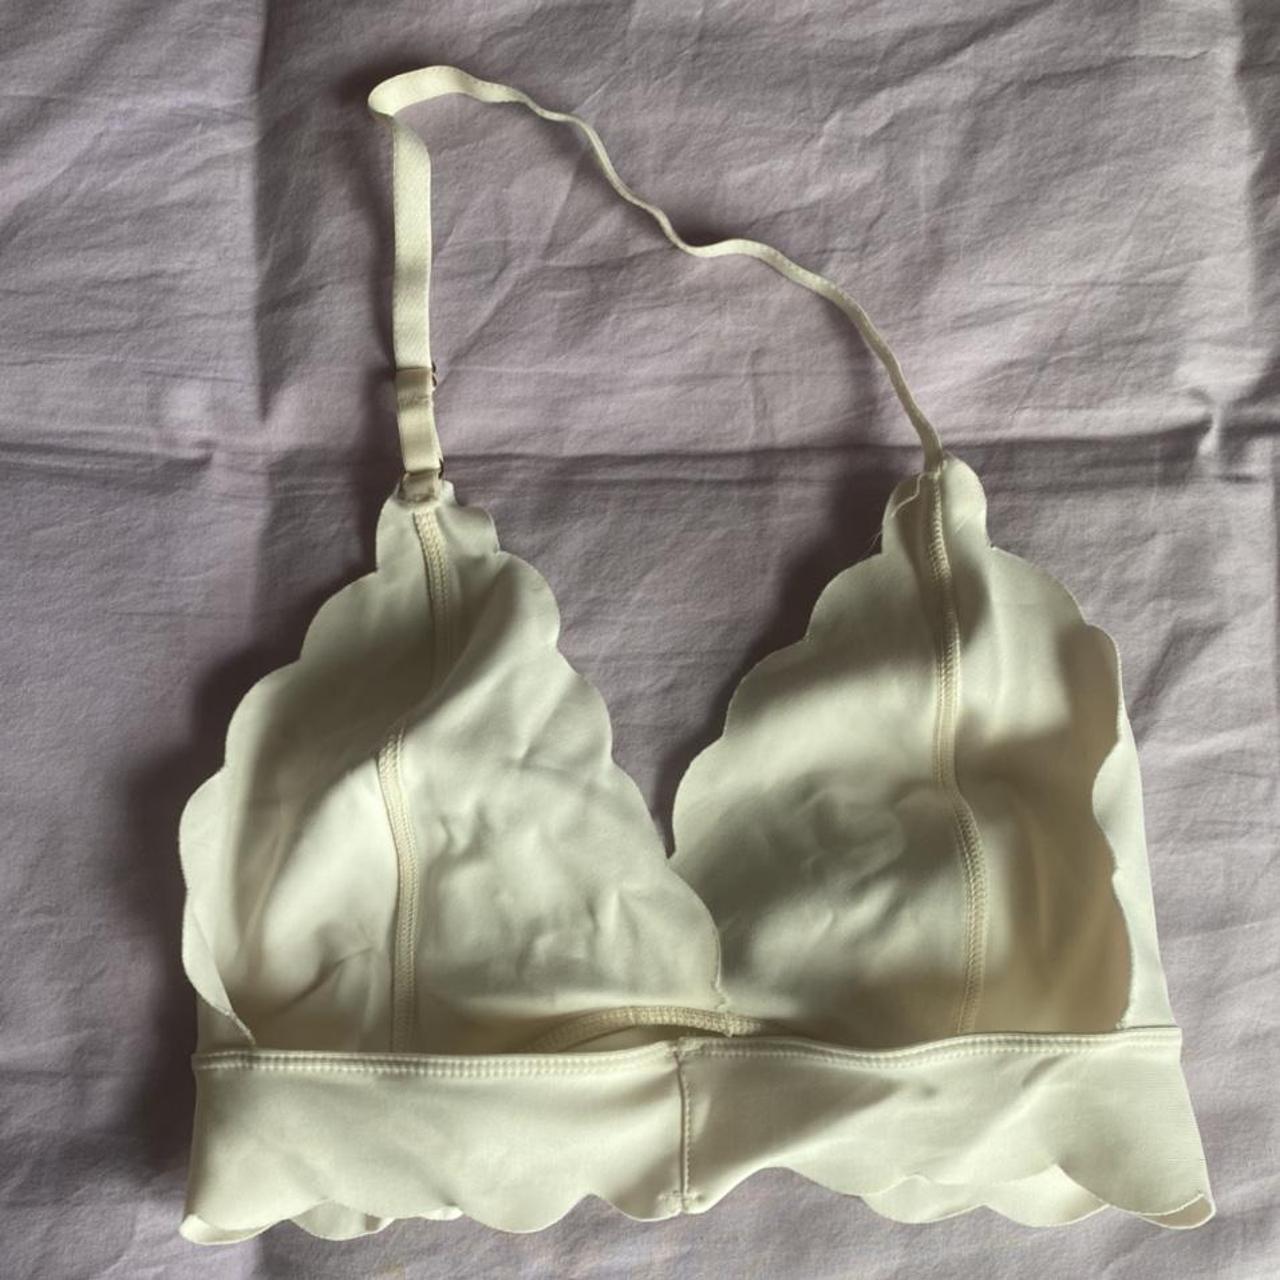 Product Image 2 - cute n girly bralet <3
listed